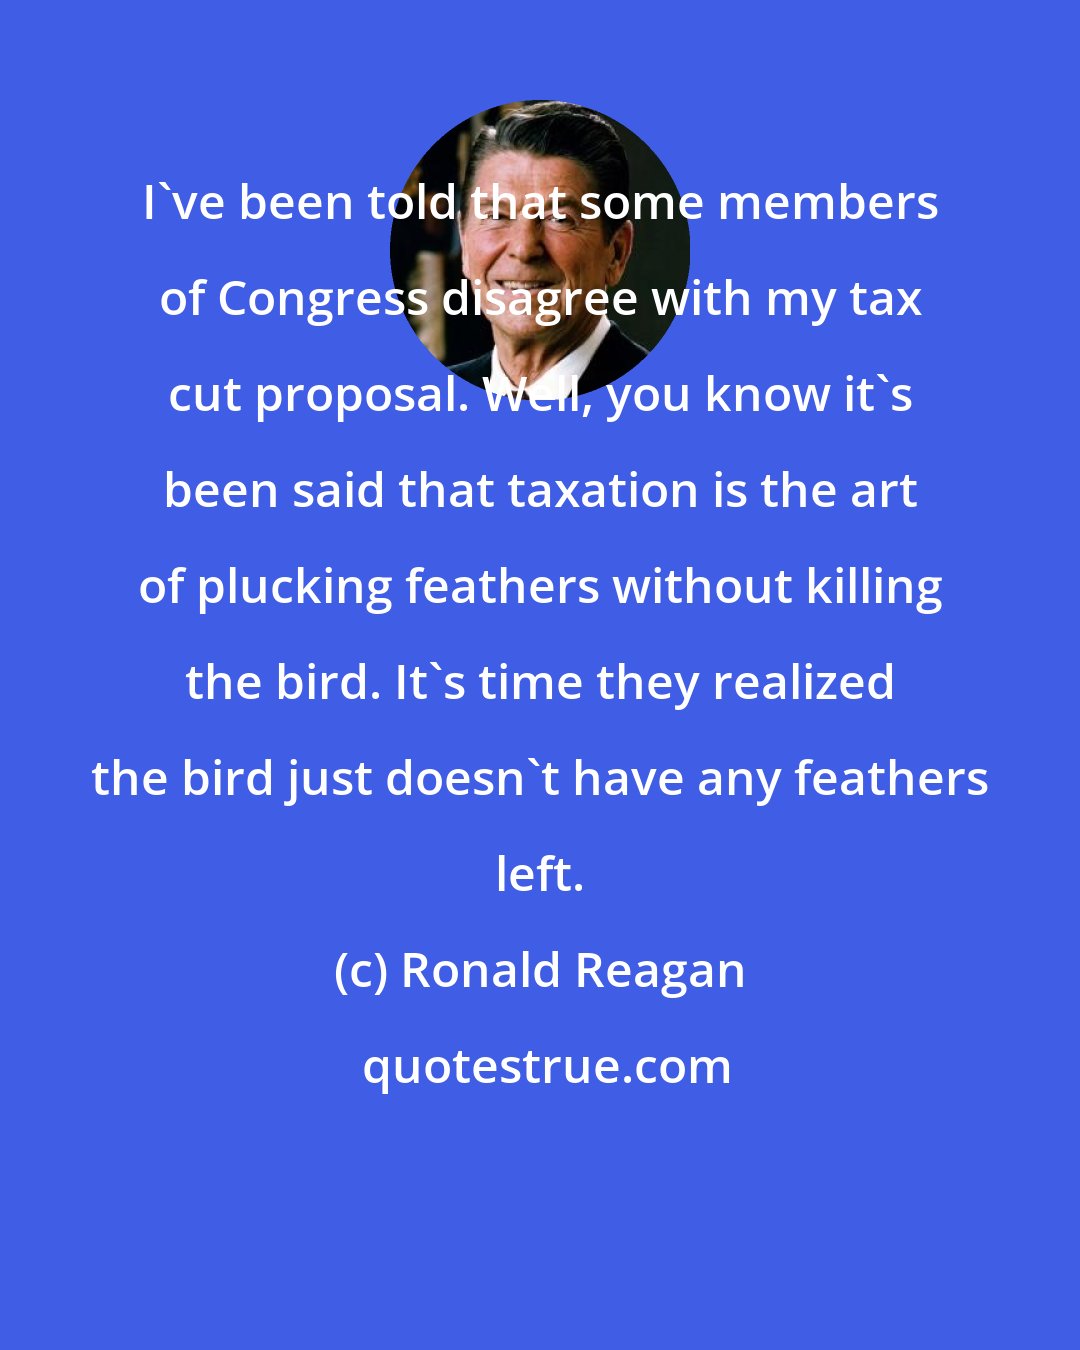 Ronald Reagan: I've been told that some members of Congress disagree with my tax cut proposal. Well, you know it's been said that taxation is the art of plucking feathers without killing the bird. It's time they realized the bird just doesn't have any feathers left.